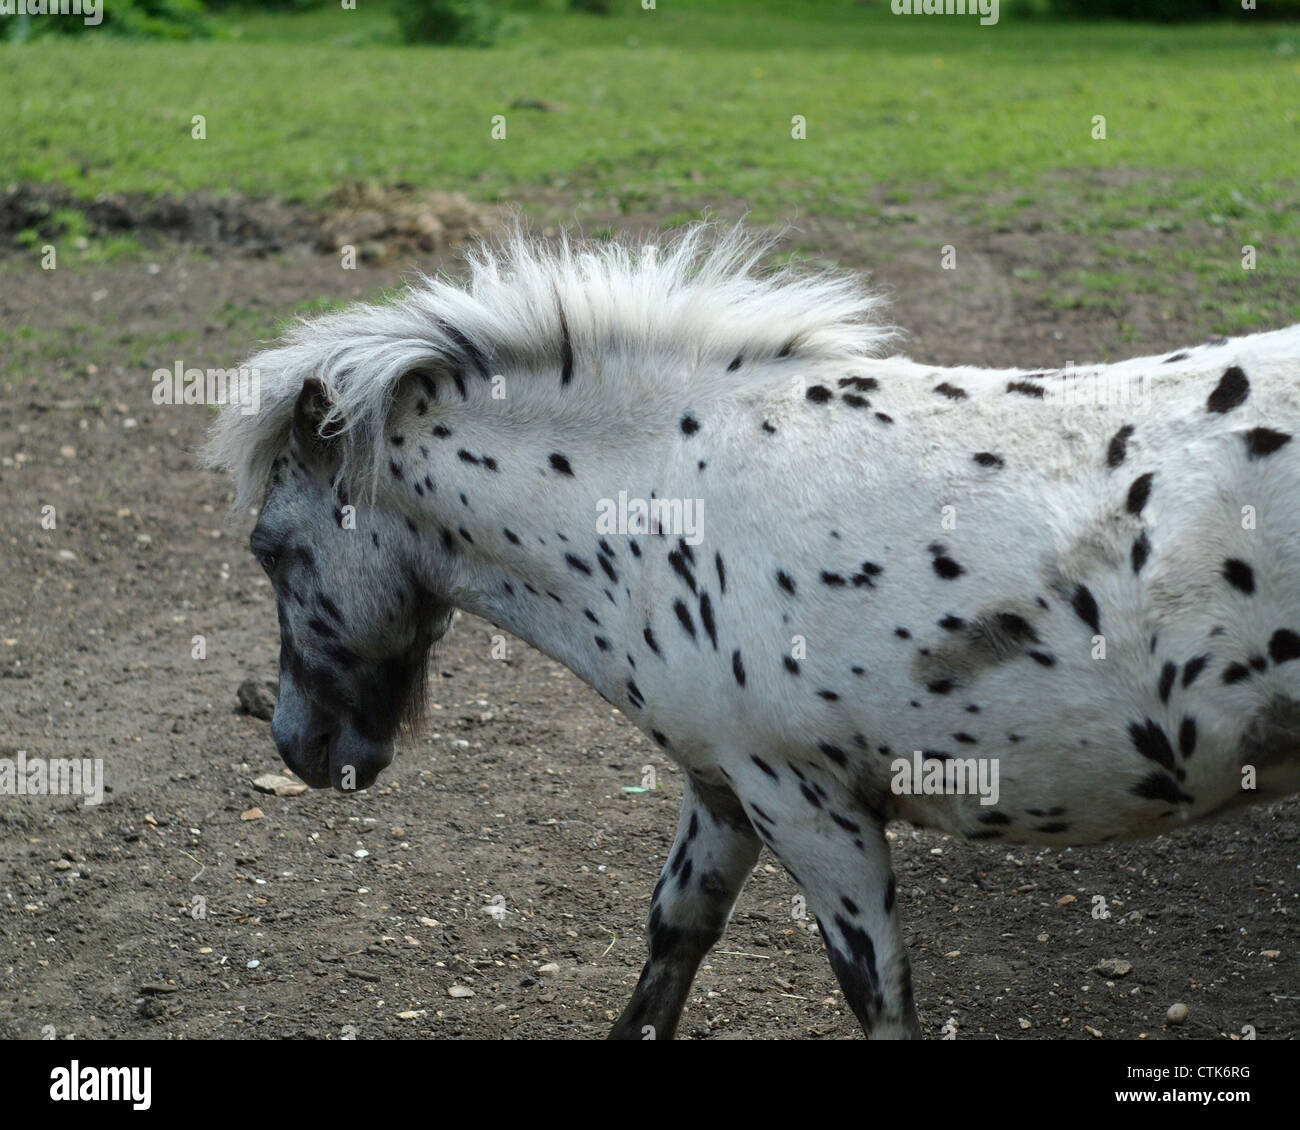 single young pony in field, side view Stock Photo